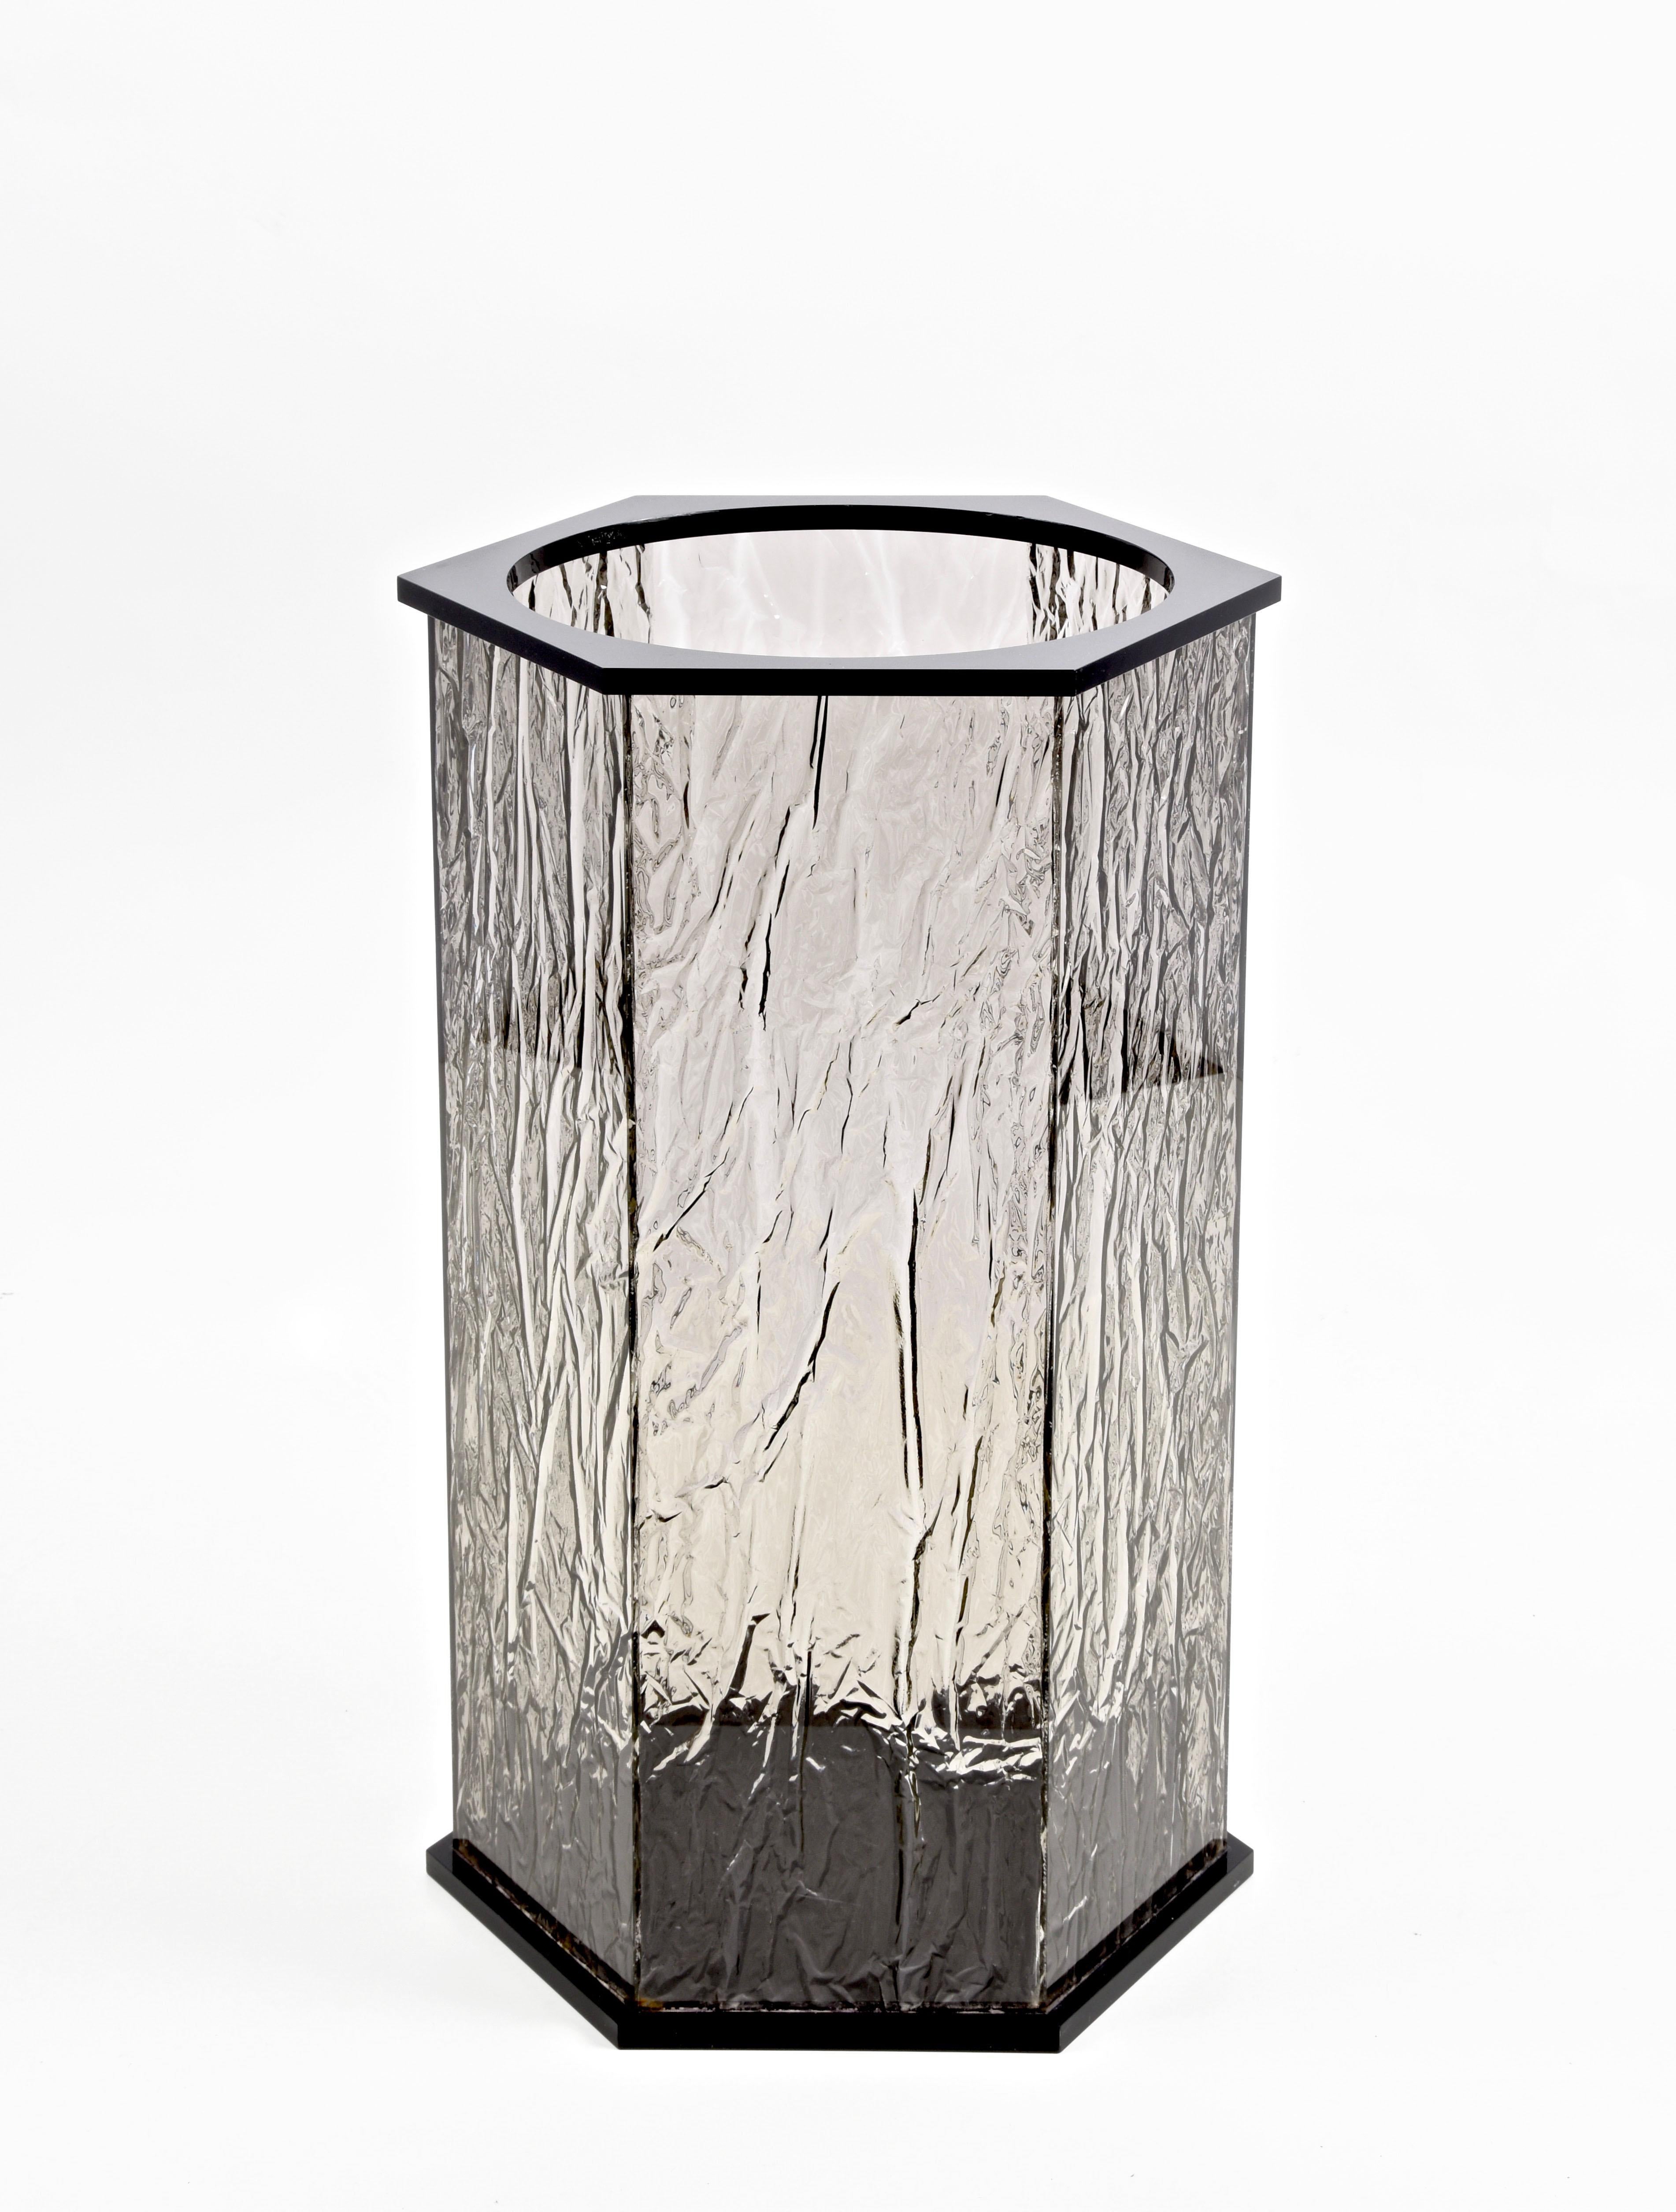 Midcentury hexagonal umbrella stands in ice and black Lucite. This stunning item was produced after Willy Rizzo, 1980s

This piece has beautiful yet simple lines, with a clear inspiration from Willy Rizzo's design. The Lucite is designed in order